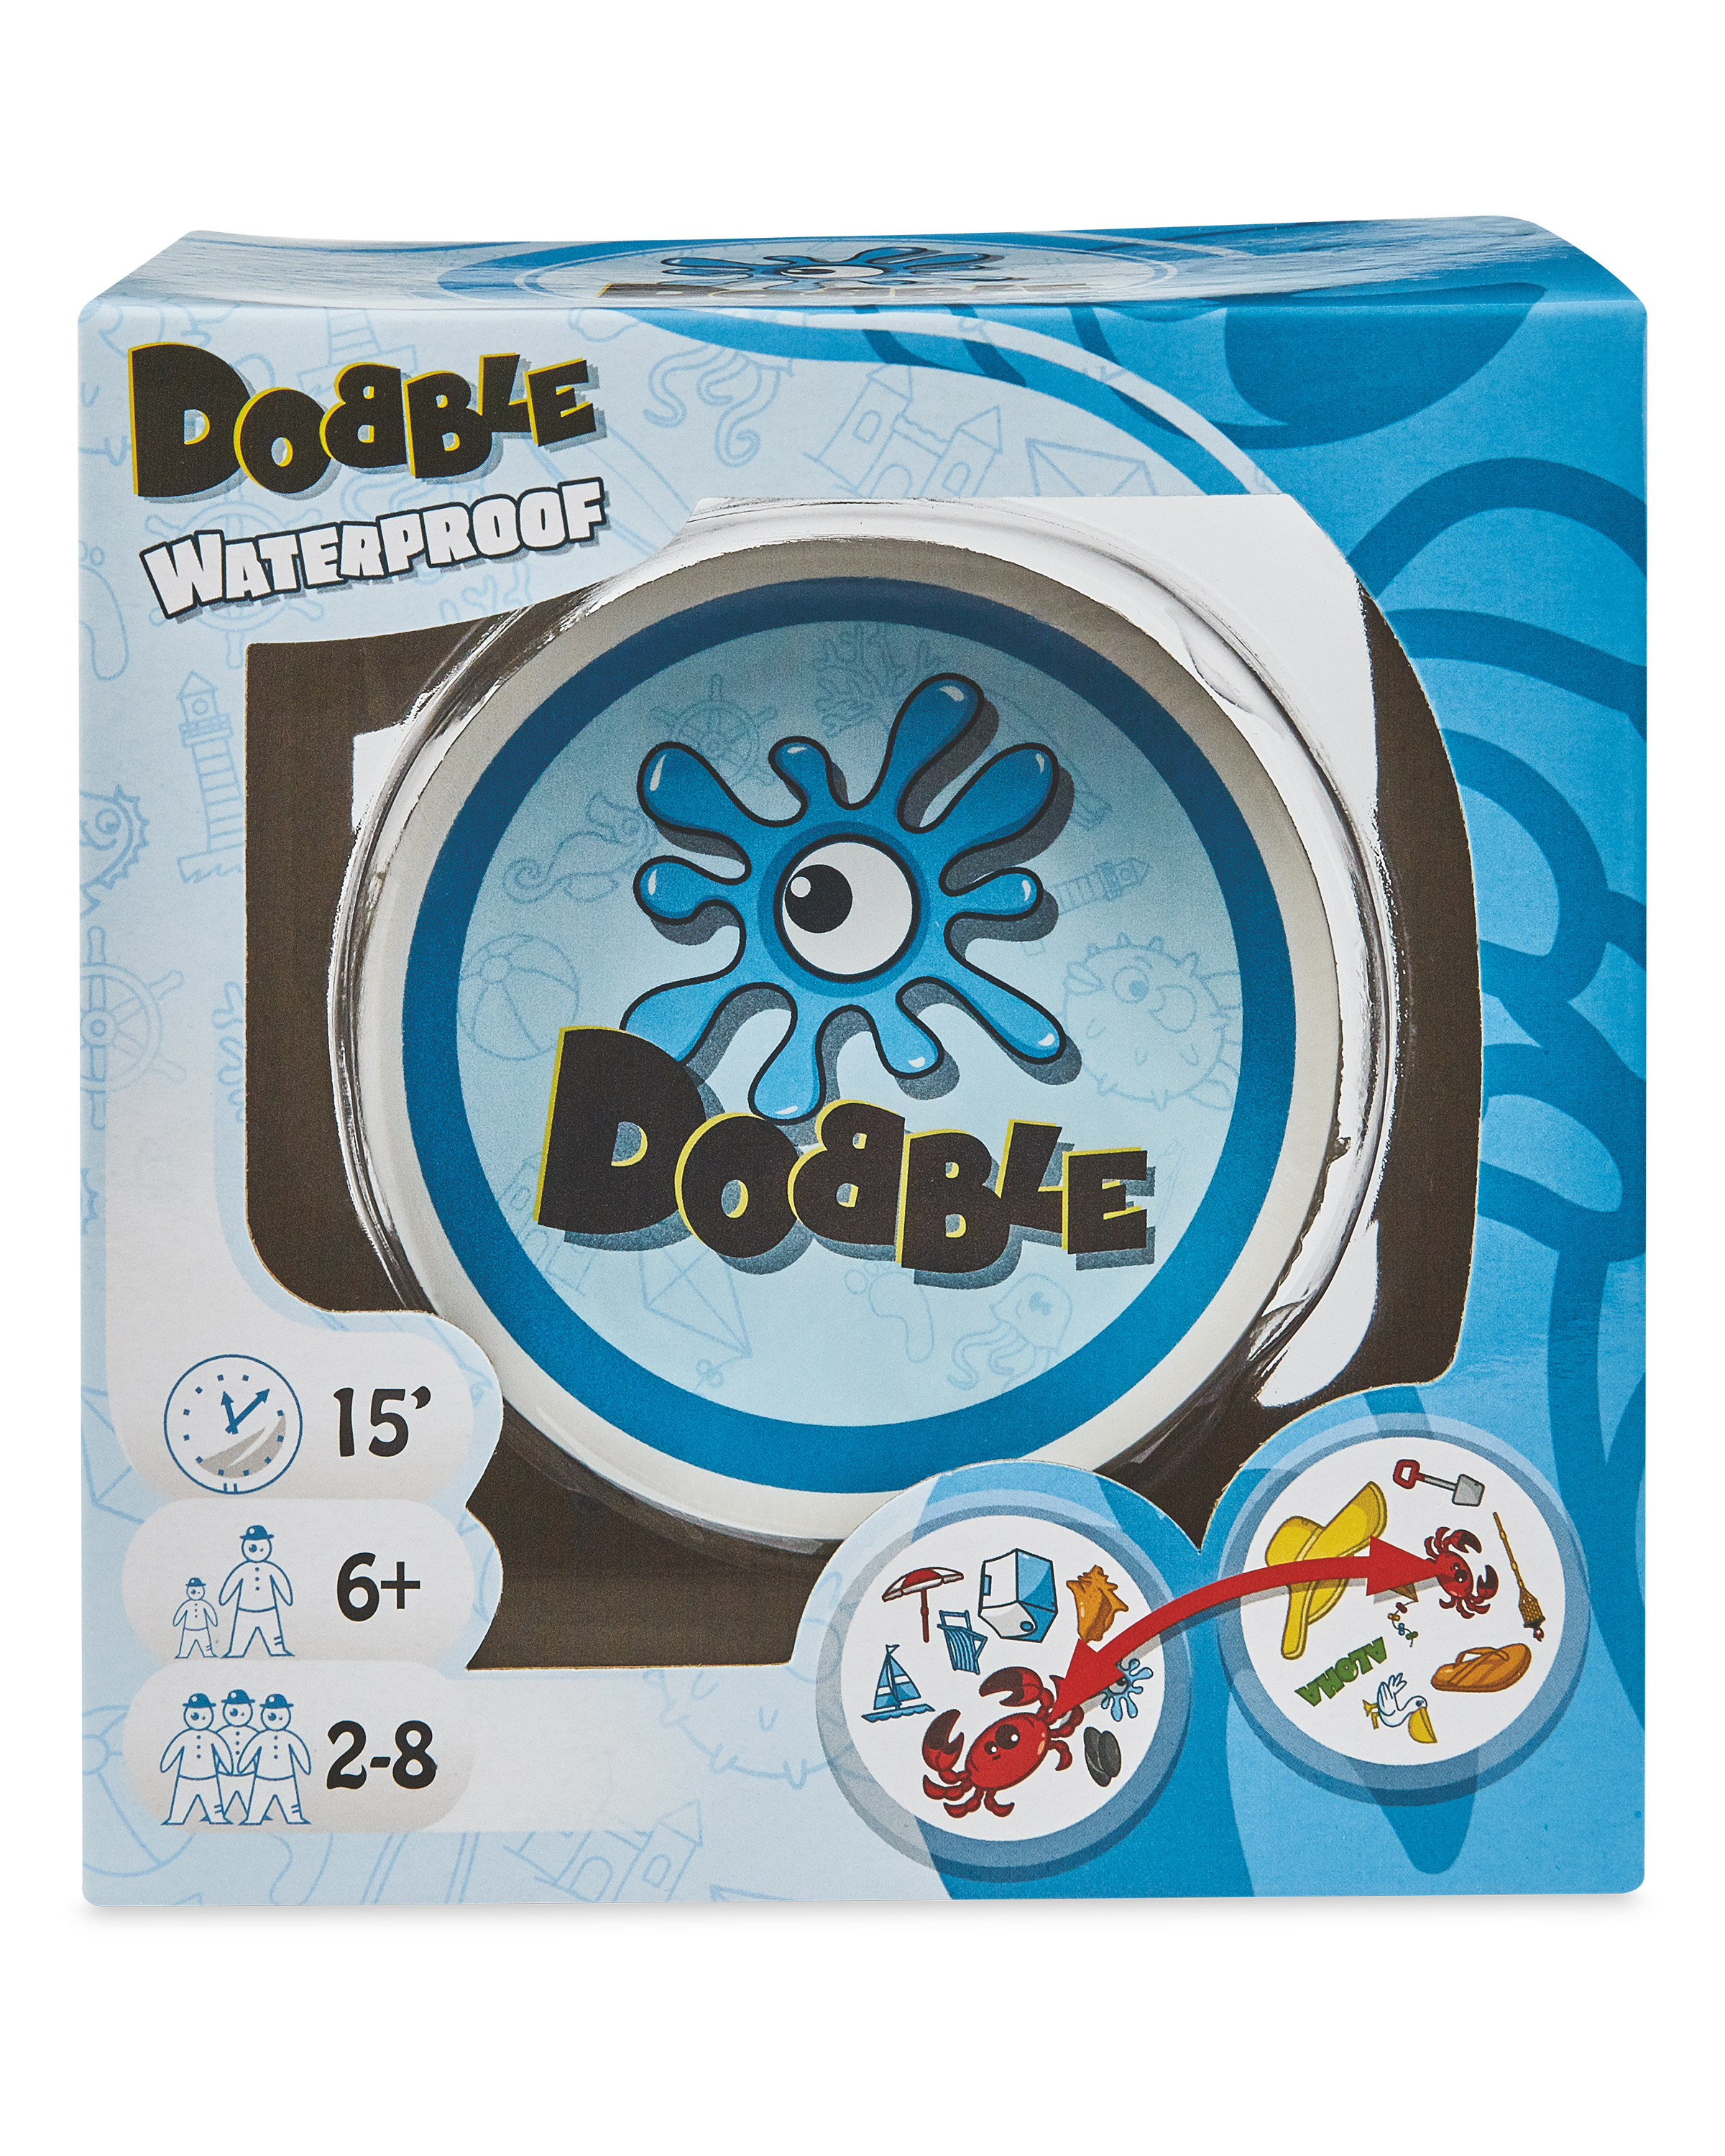 Dobble Card Game - Waterproof Edition